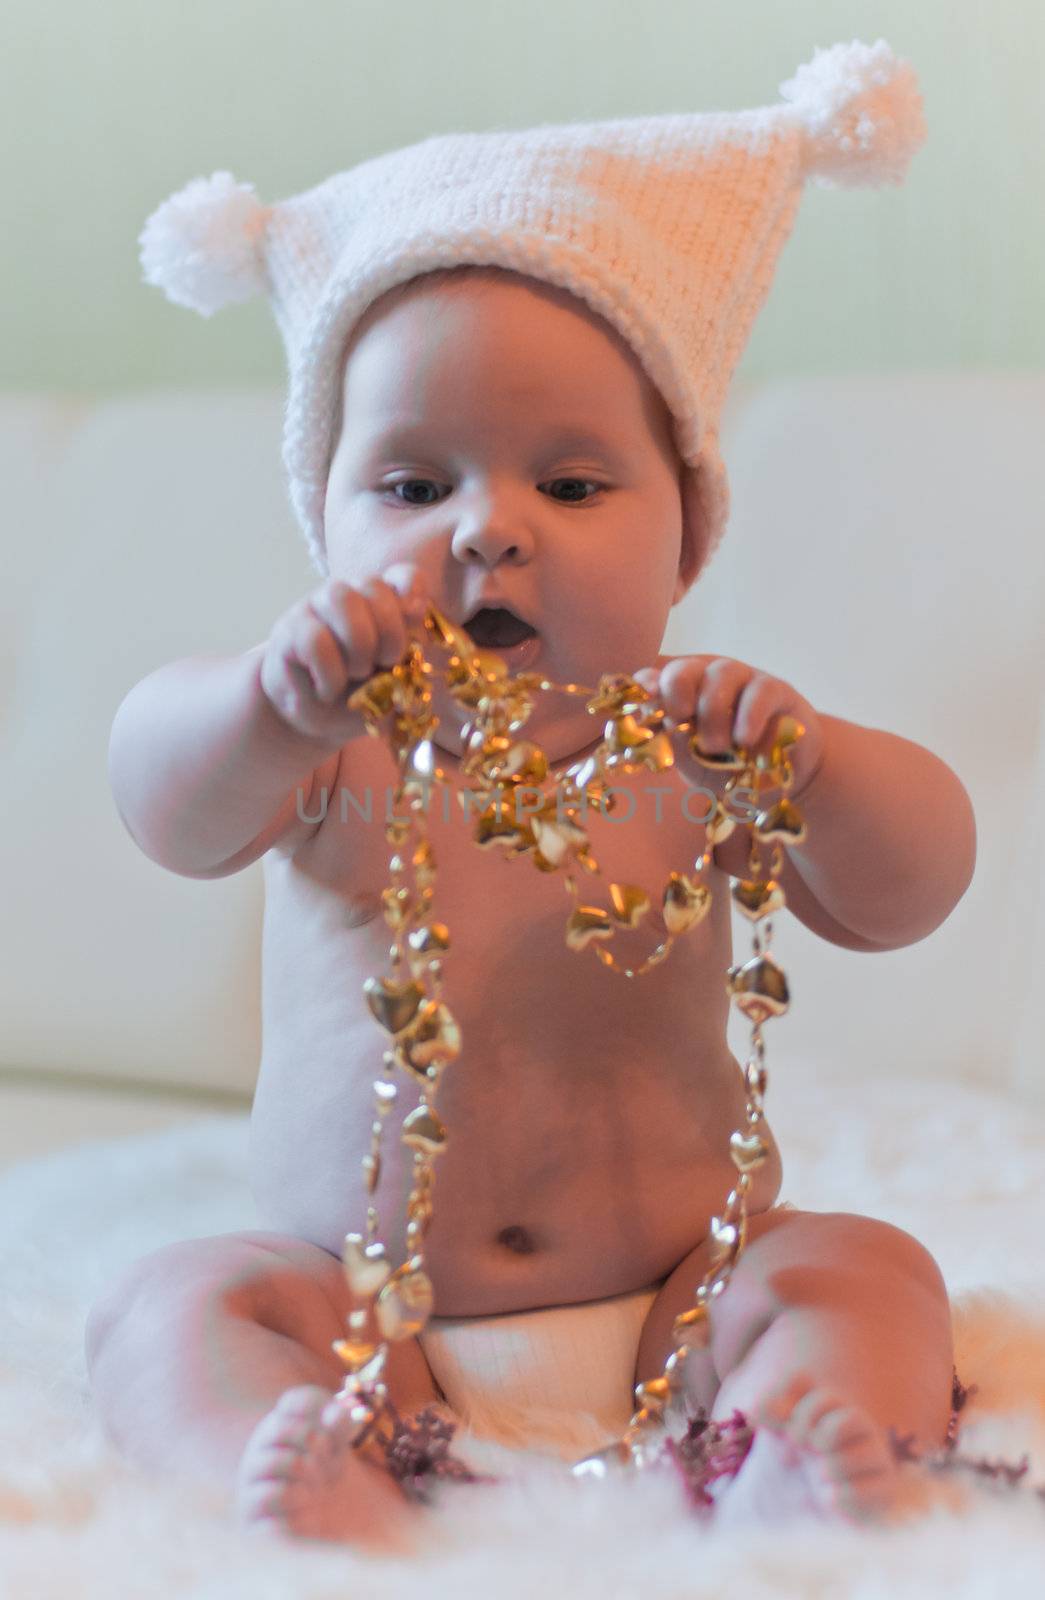 Baby in hat plays with gold tinsels